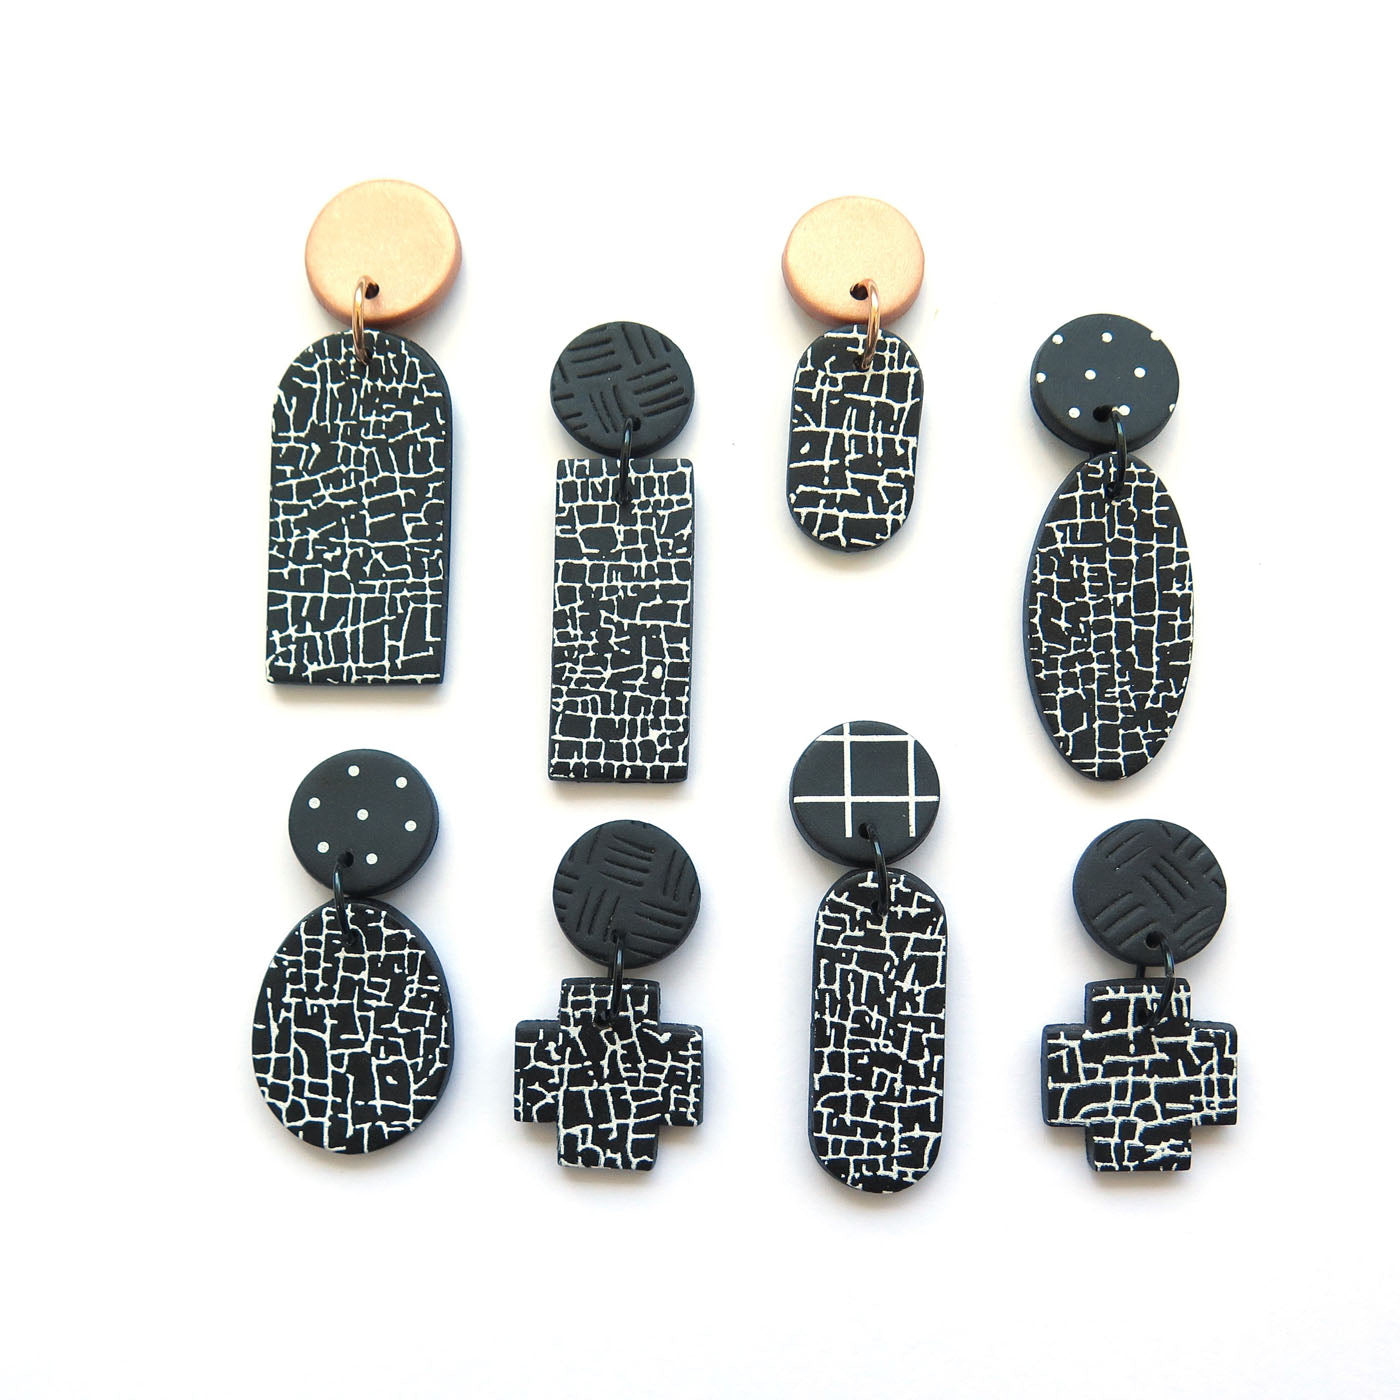 Crackle Black and White Statement Earrings - Egg drop -Polymer Clay